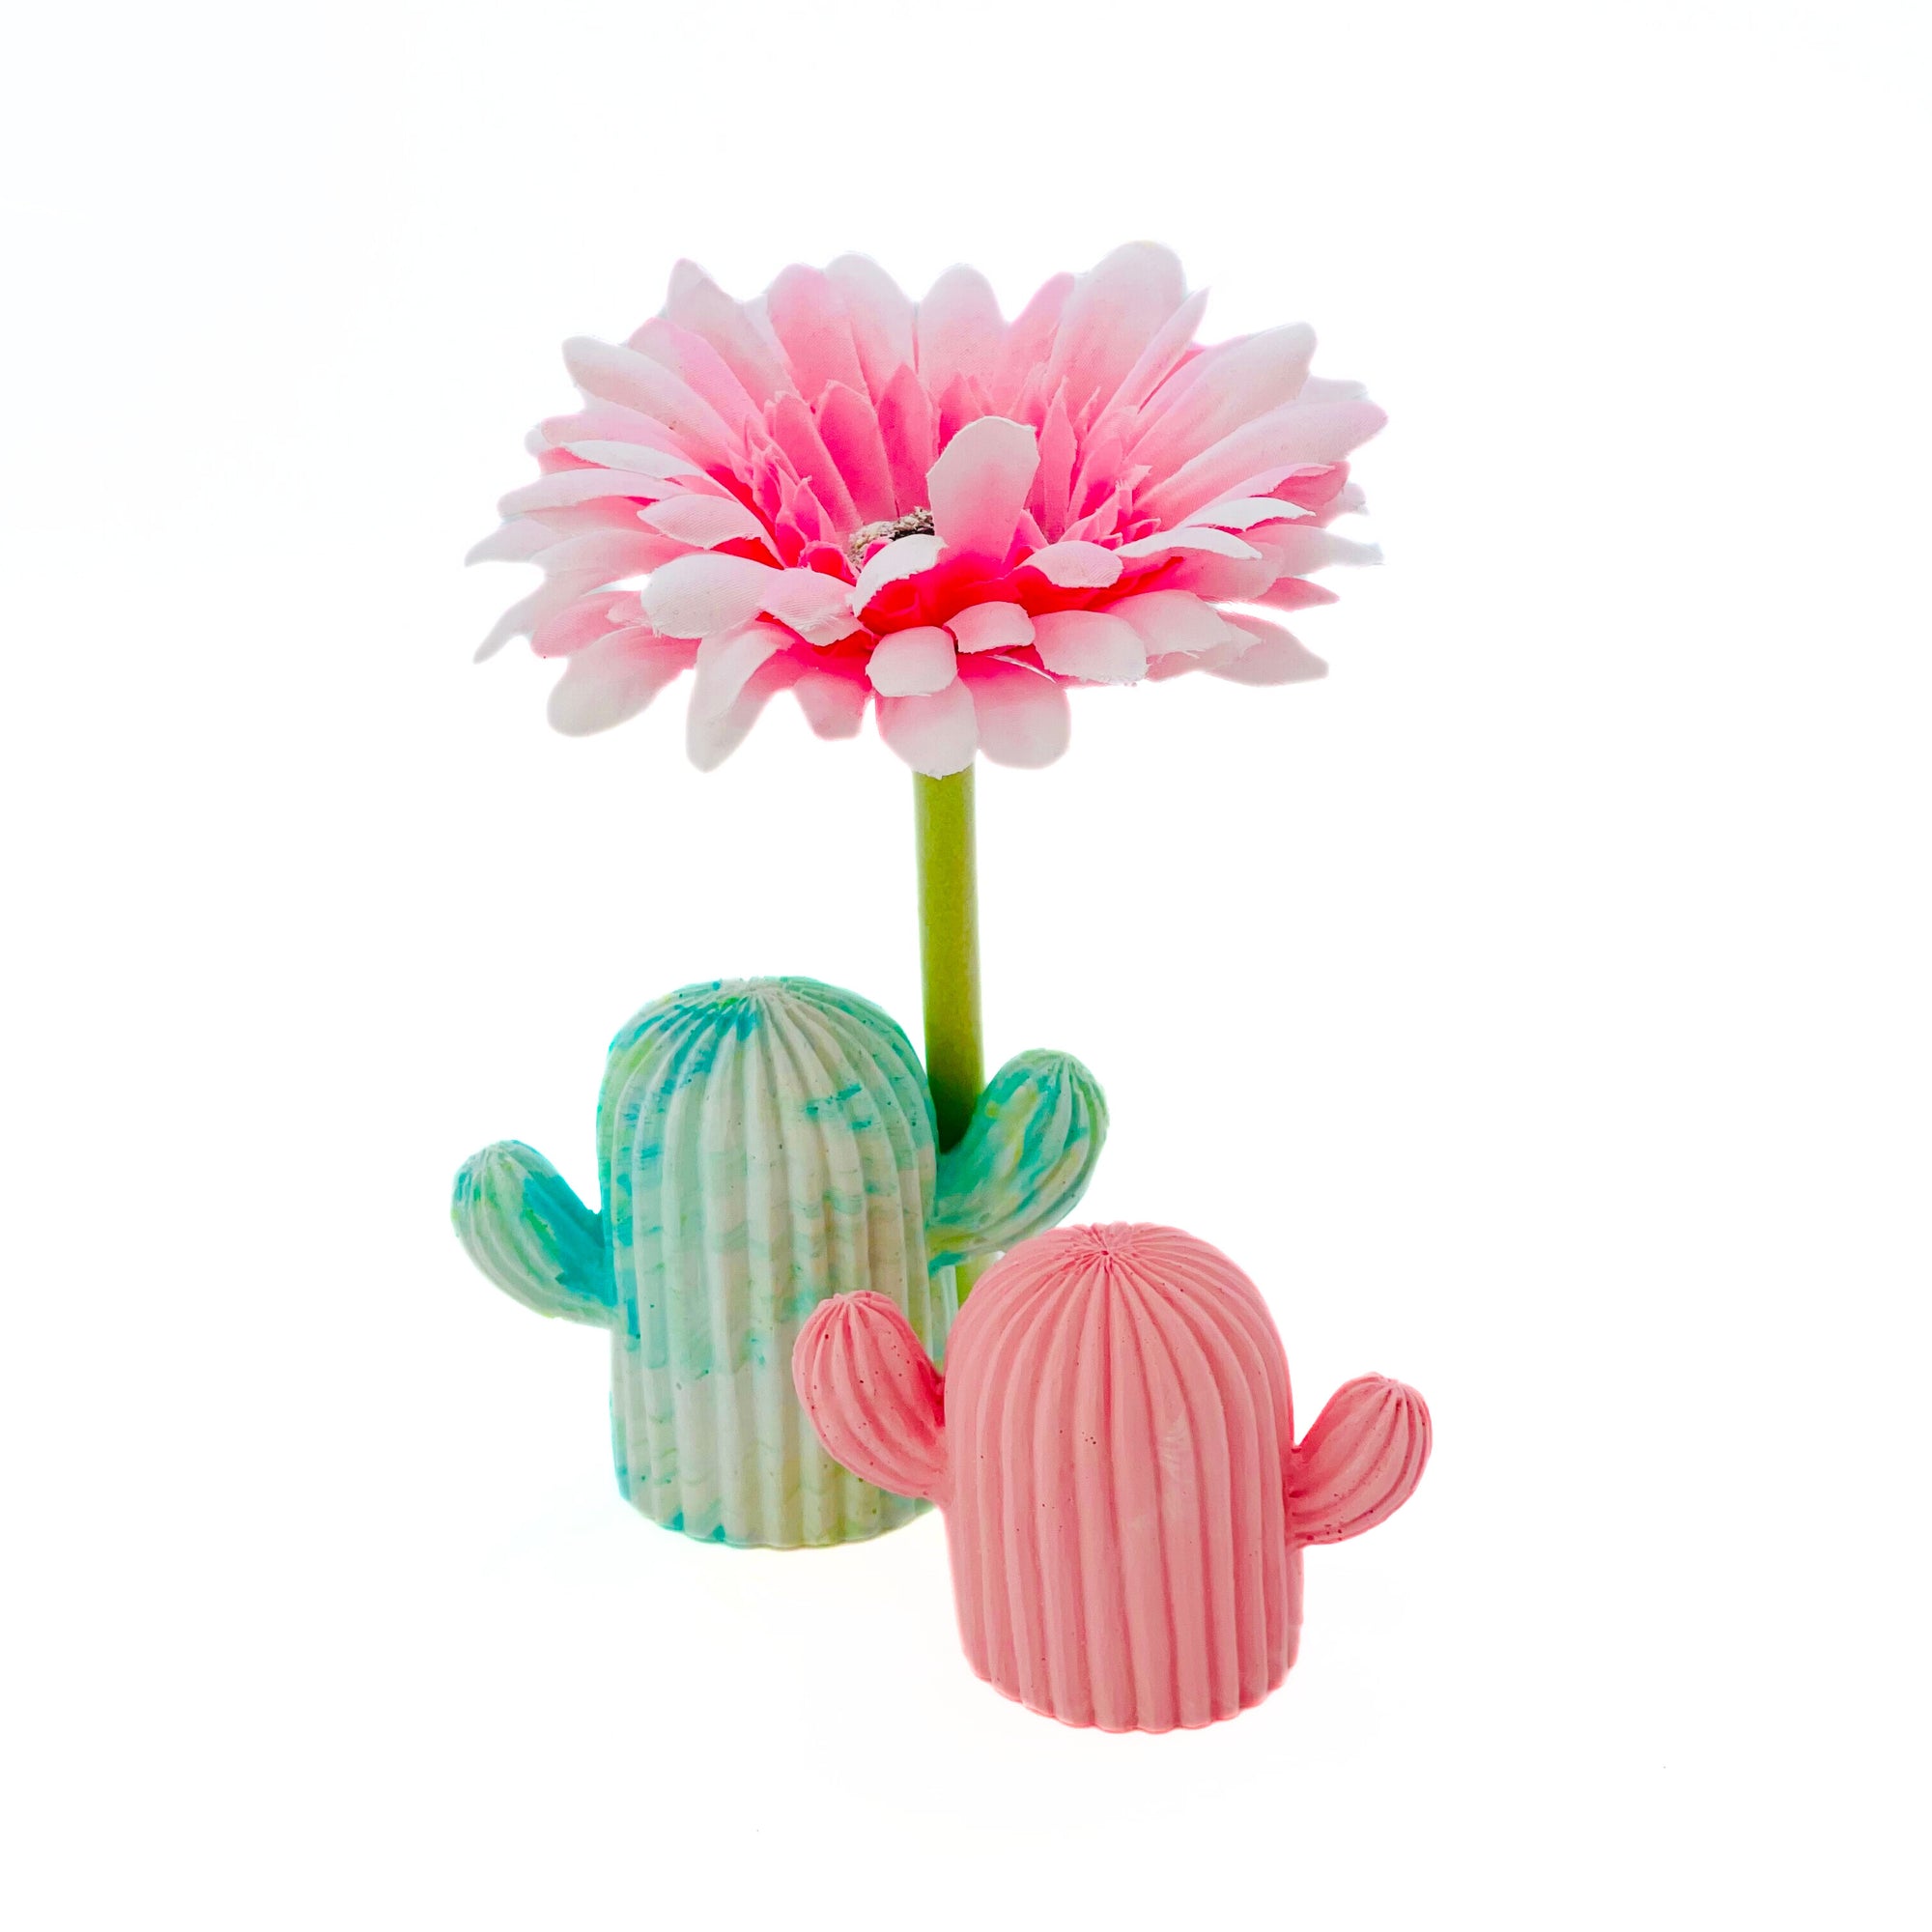 Medium size jesmonite ornamental cactus measuring 7.5cm tall marbled with turquoise and lime pigment.